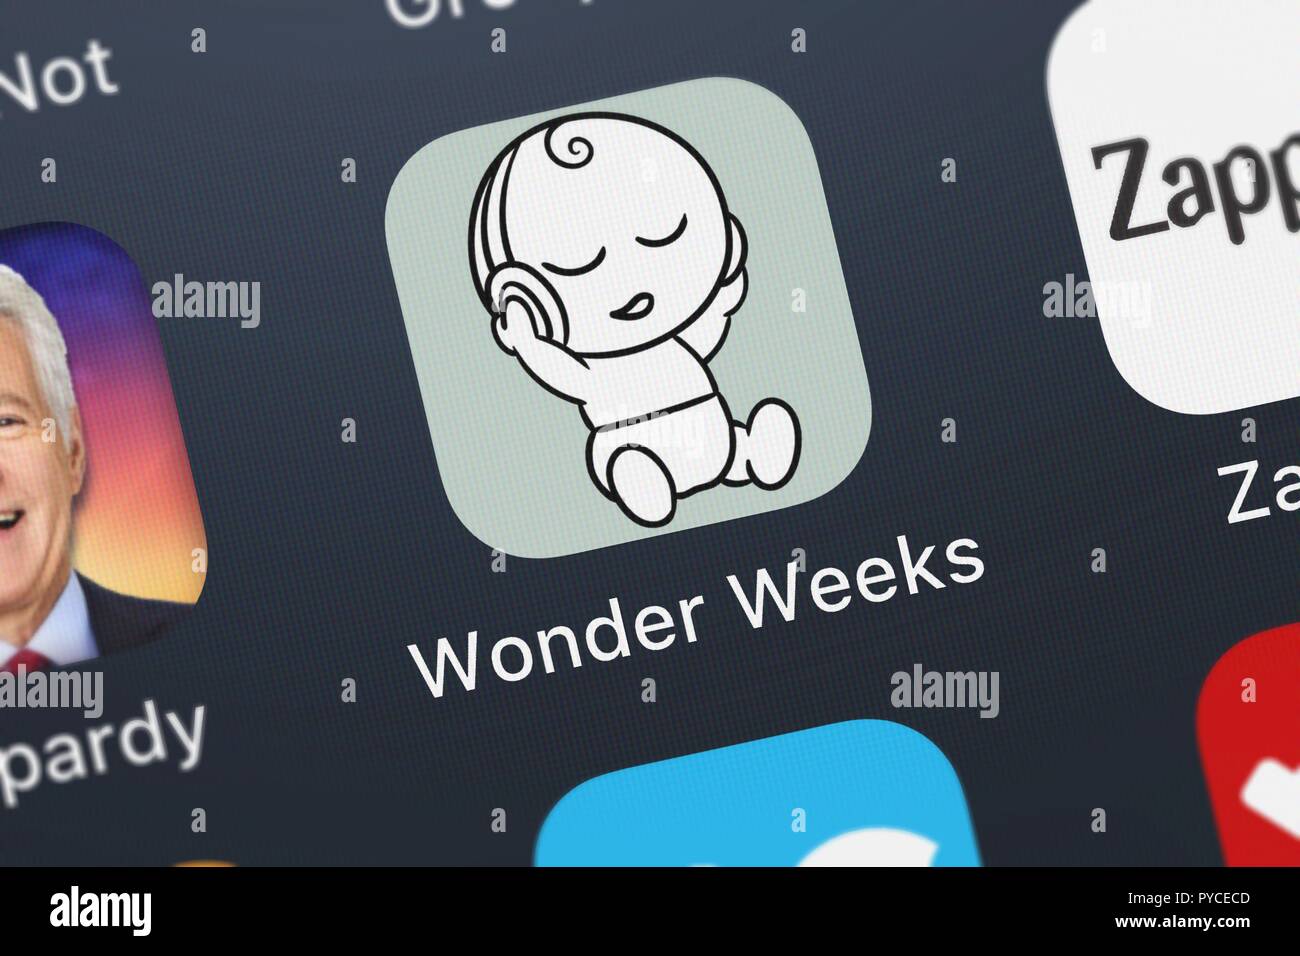 London, United Kingdom - October 26, 2018: Close-up shot of the The Wonder Weeks - Audiobook mobile app from Domus Technica. Stock Photo